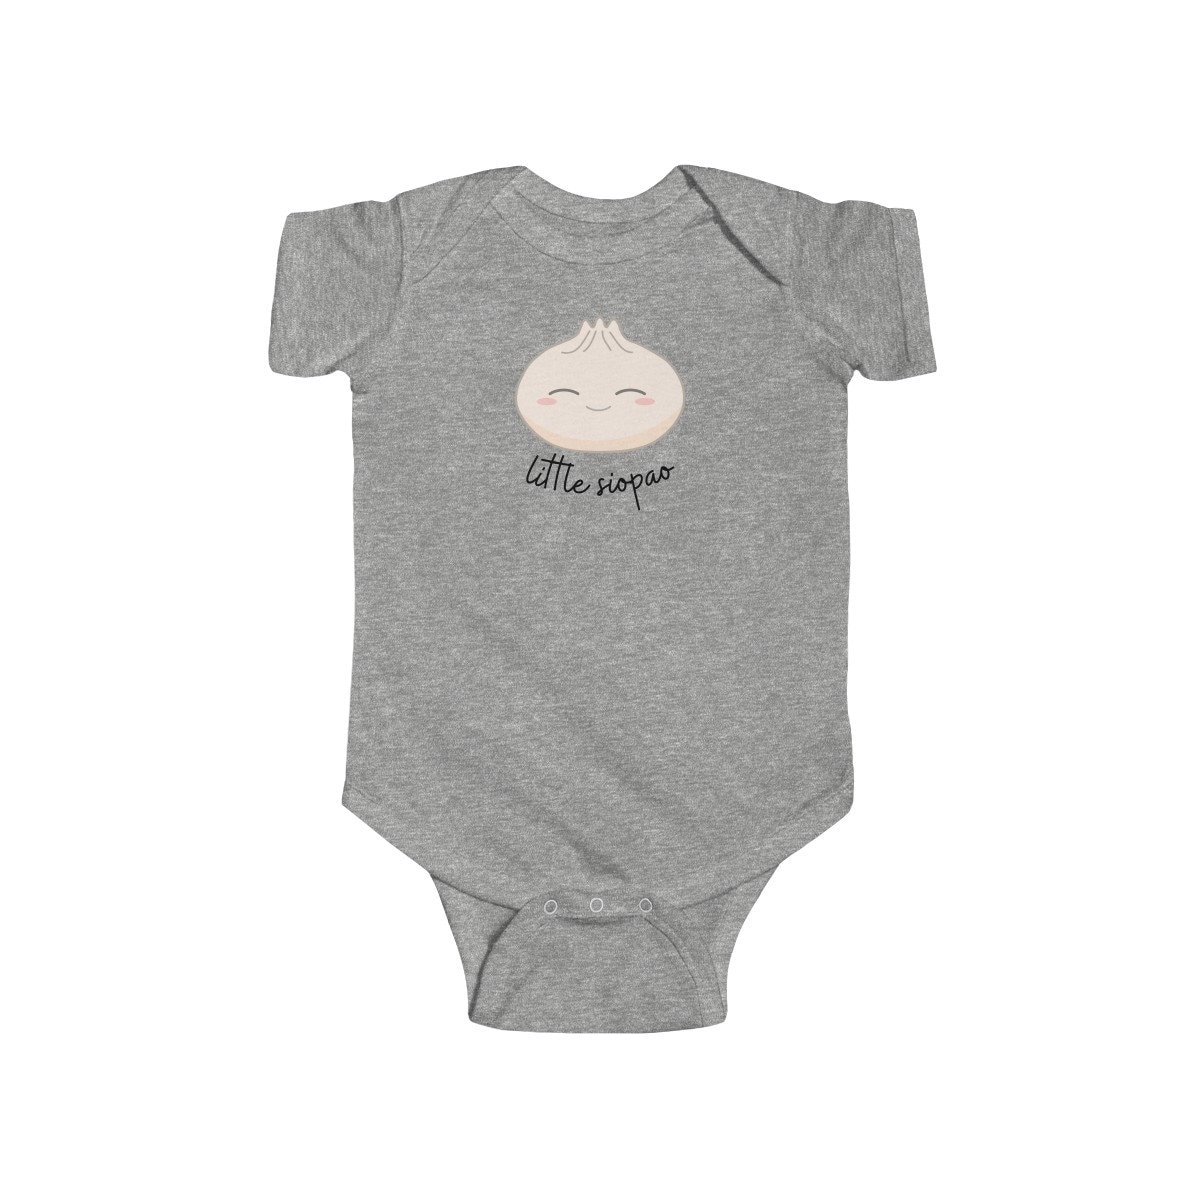 Little Siopao Bodysuit Baby Shower Gift Pregnancy Announcement Gift for New  Mom Cute Bodysuit Filipino Bodysuits Baby Clothing 